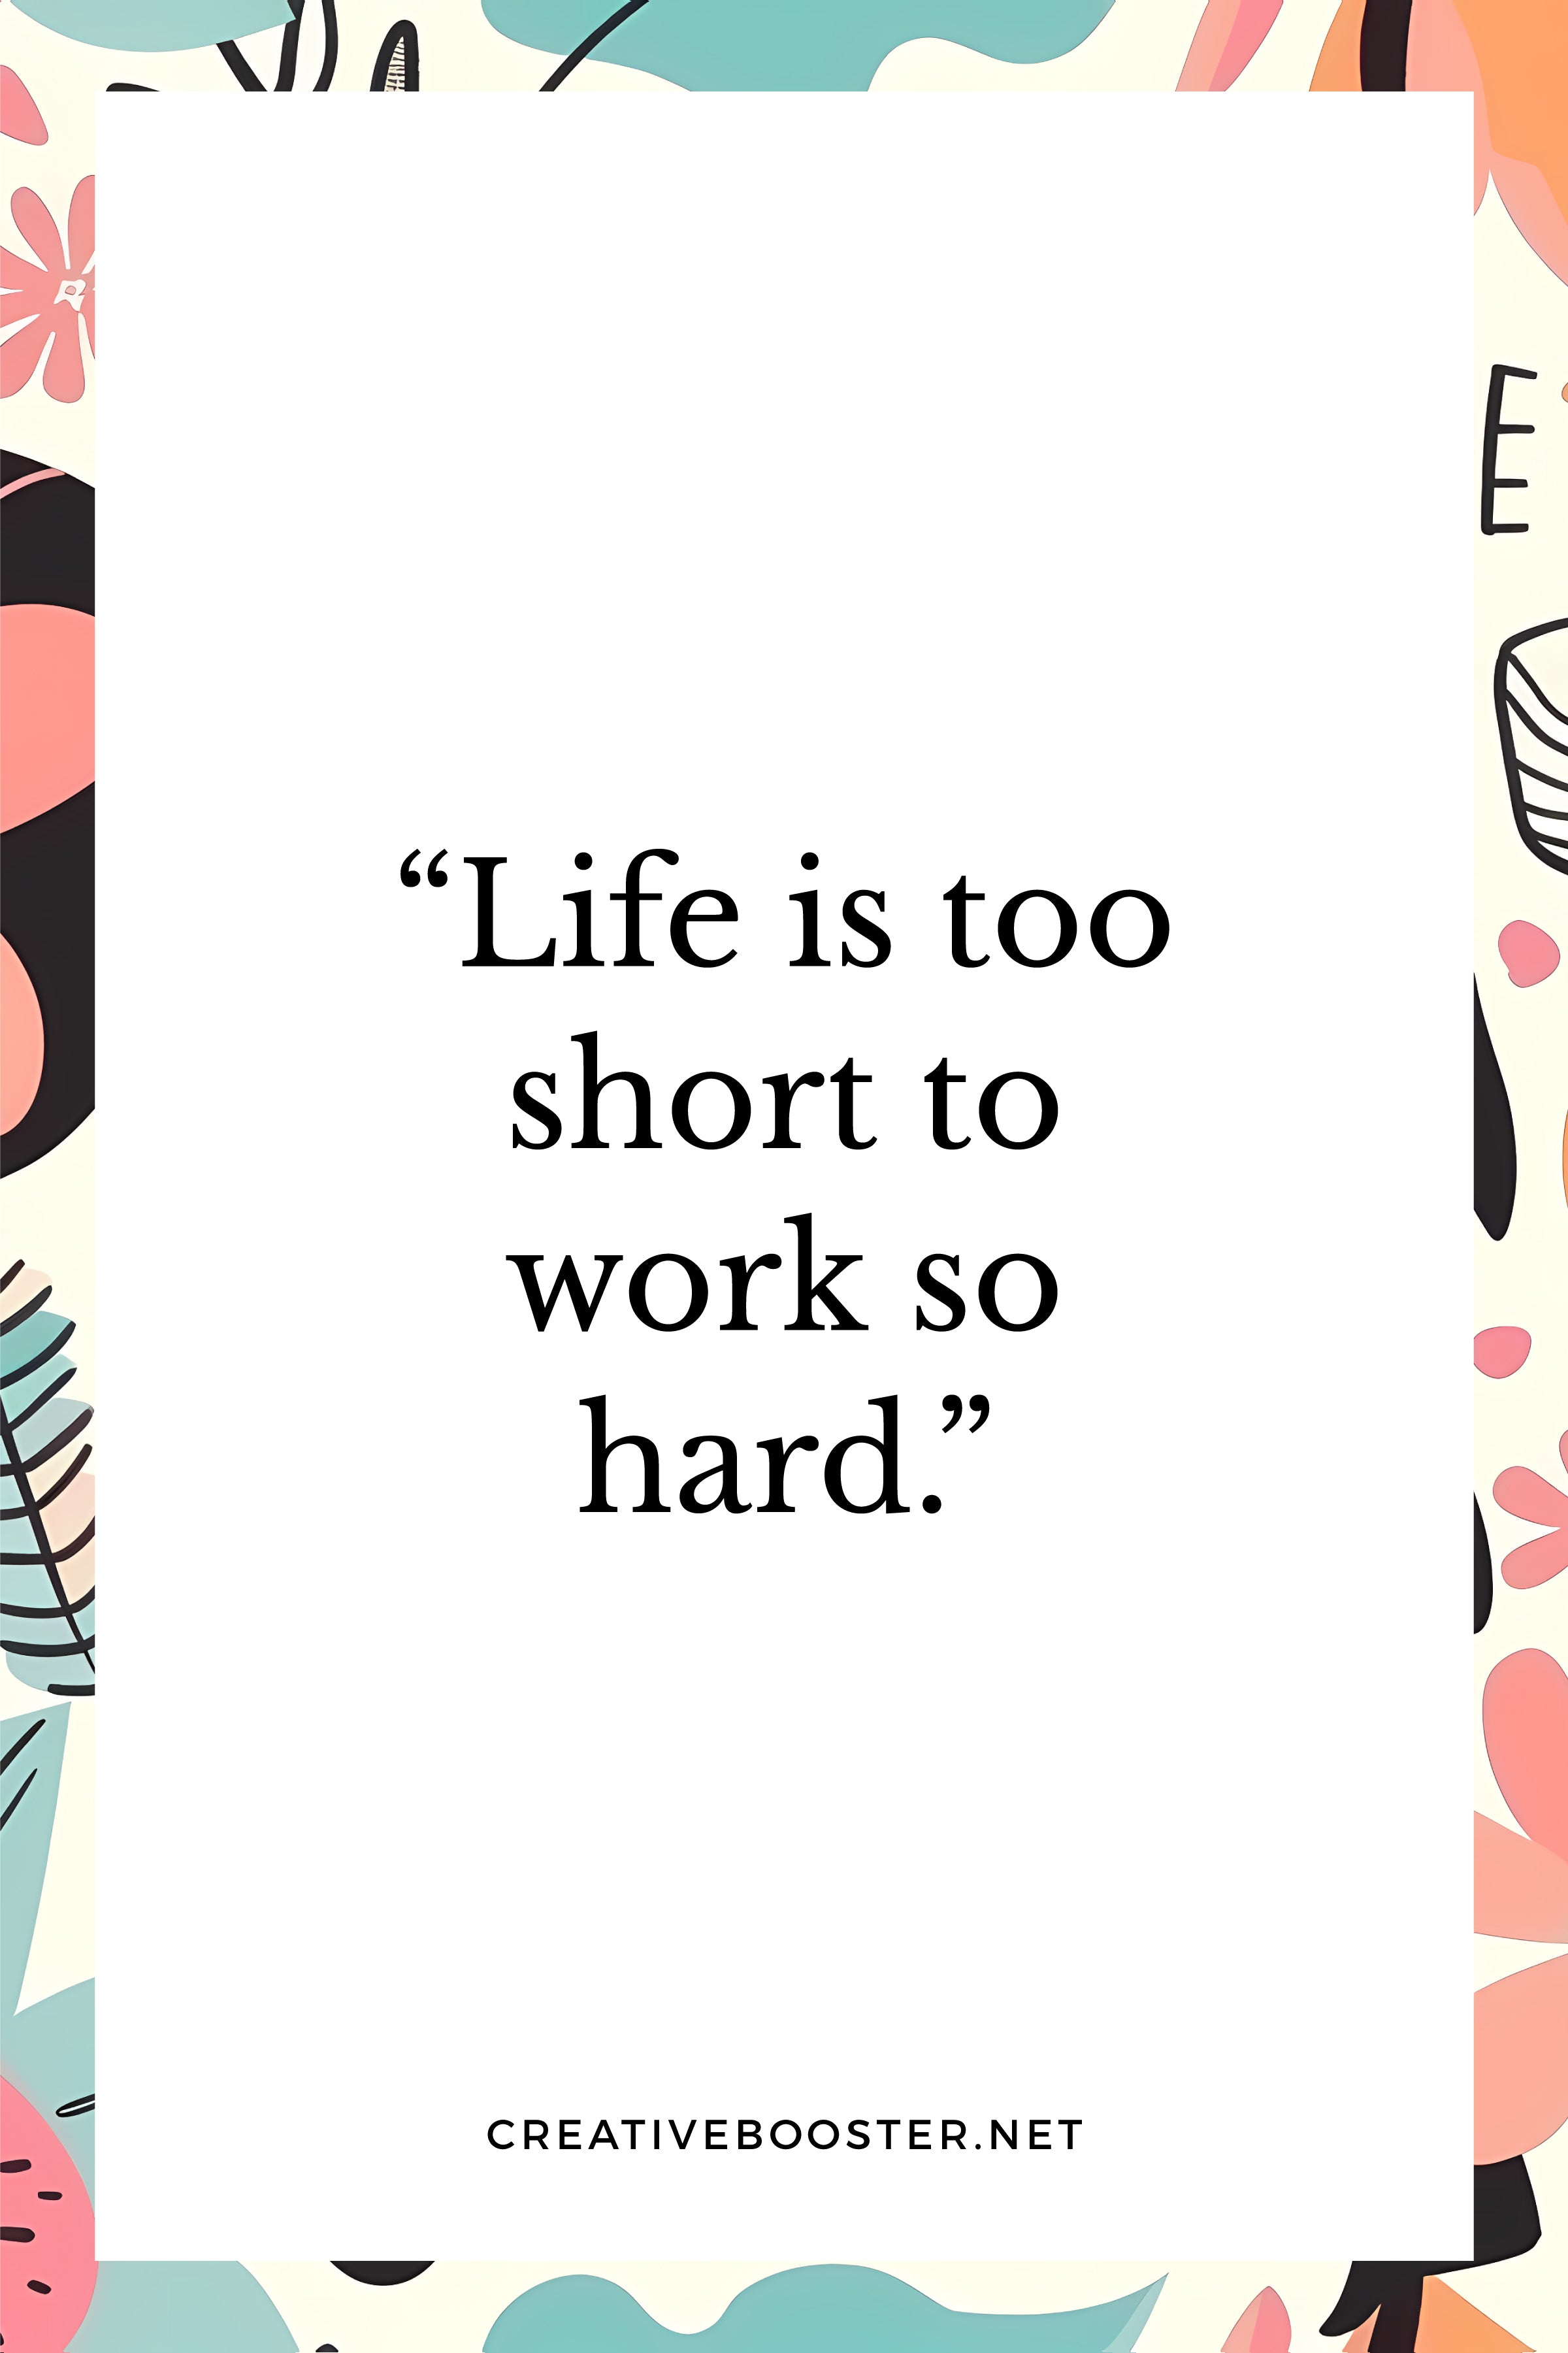 1.-Inspirational-Life-is-Too-Short-Quotes-3."Life is too short to work so hard." - Vivien Leigh